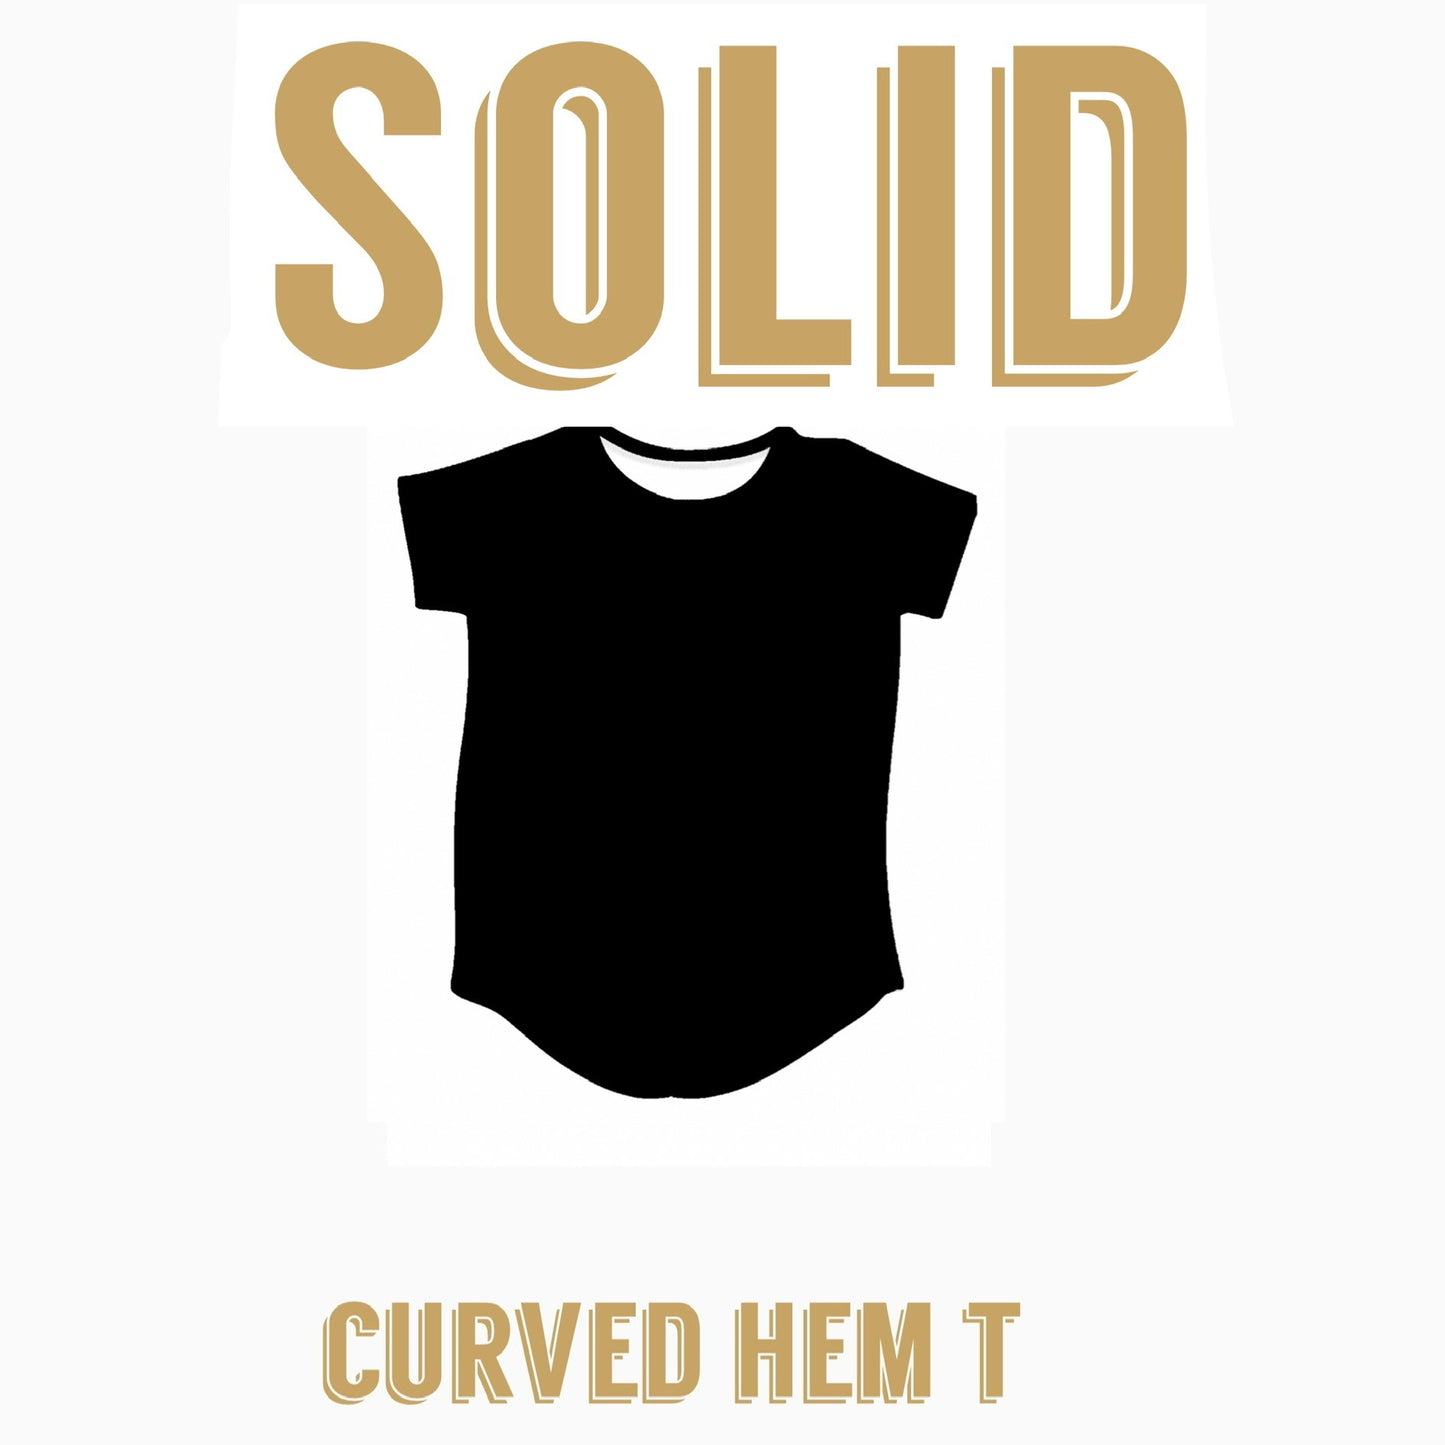 Solid | Curved hem t